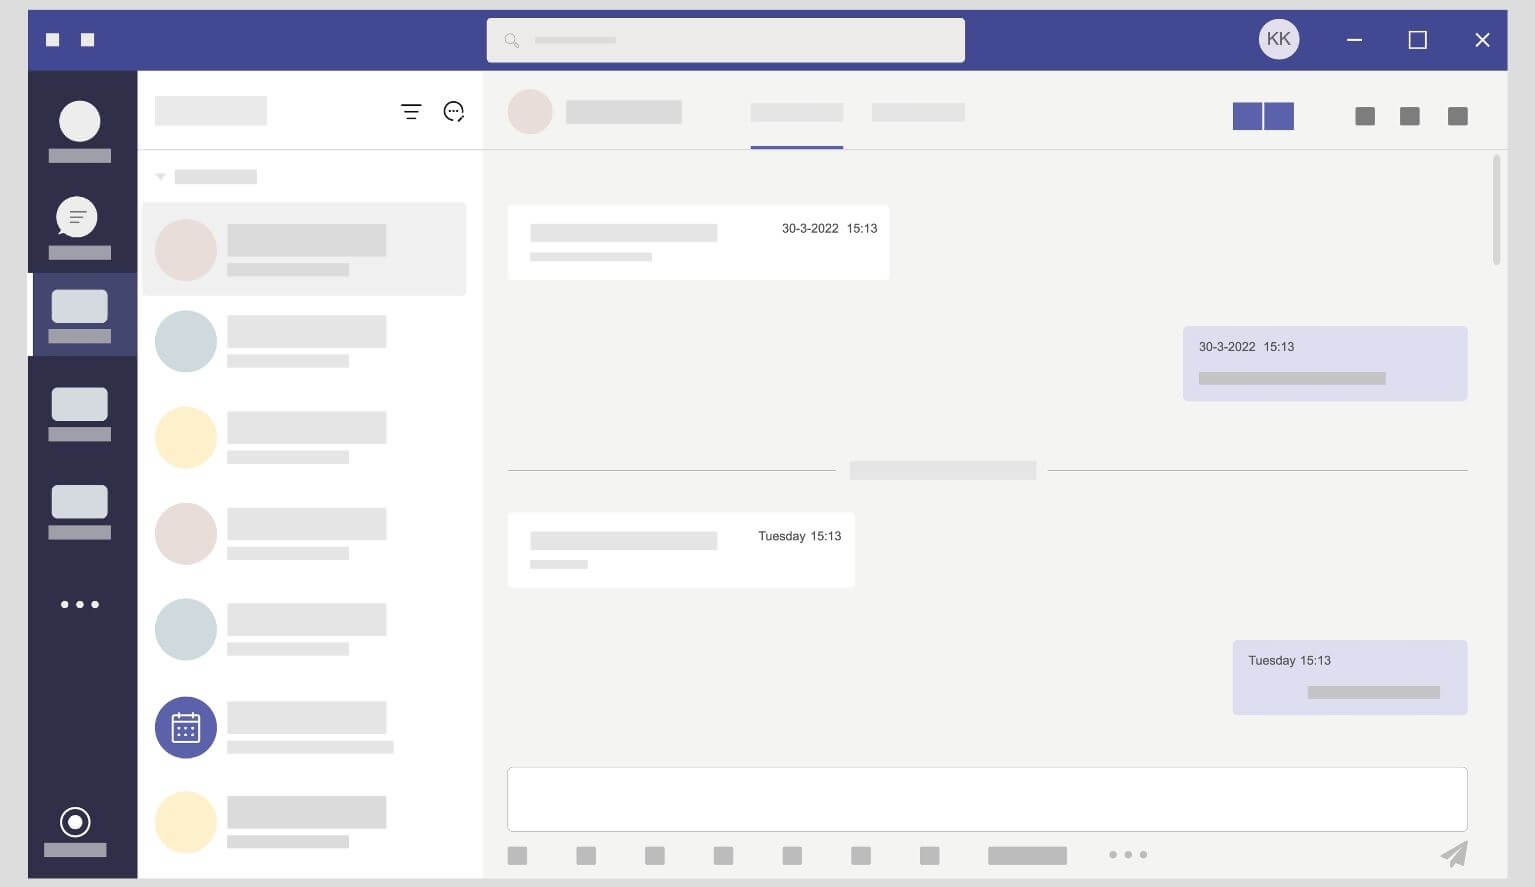 The Microsoft Teams chat integration into Outlook